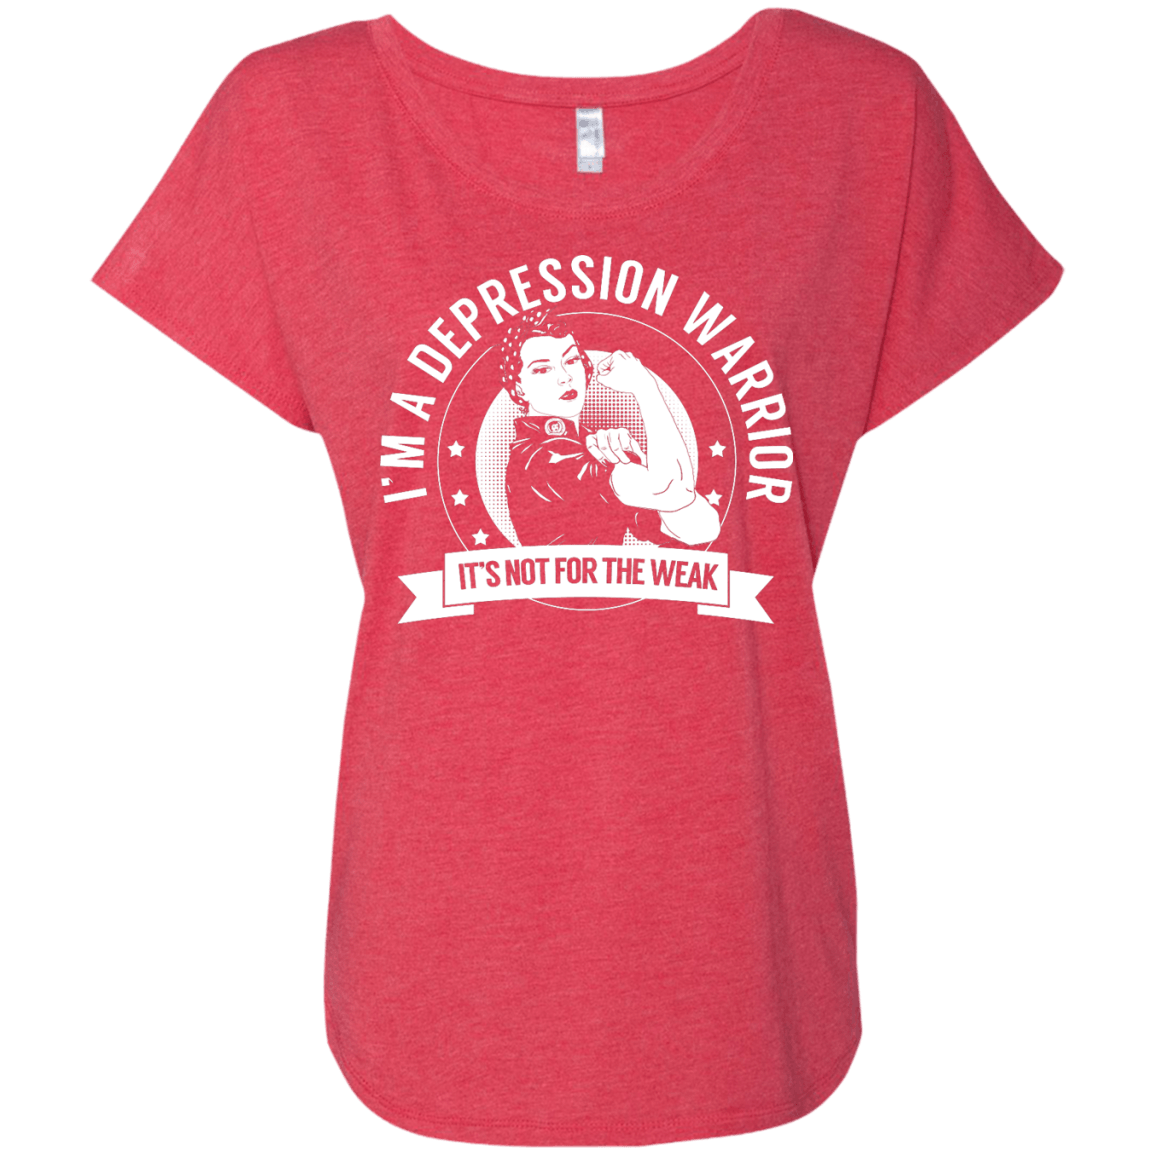 Depression Warrior Not for the Weak Dolman Sleeve - The Unchargeables